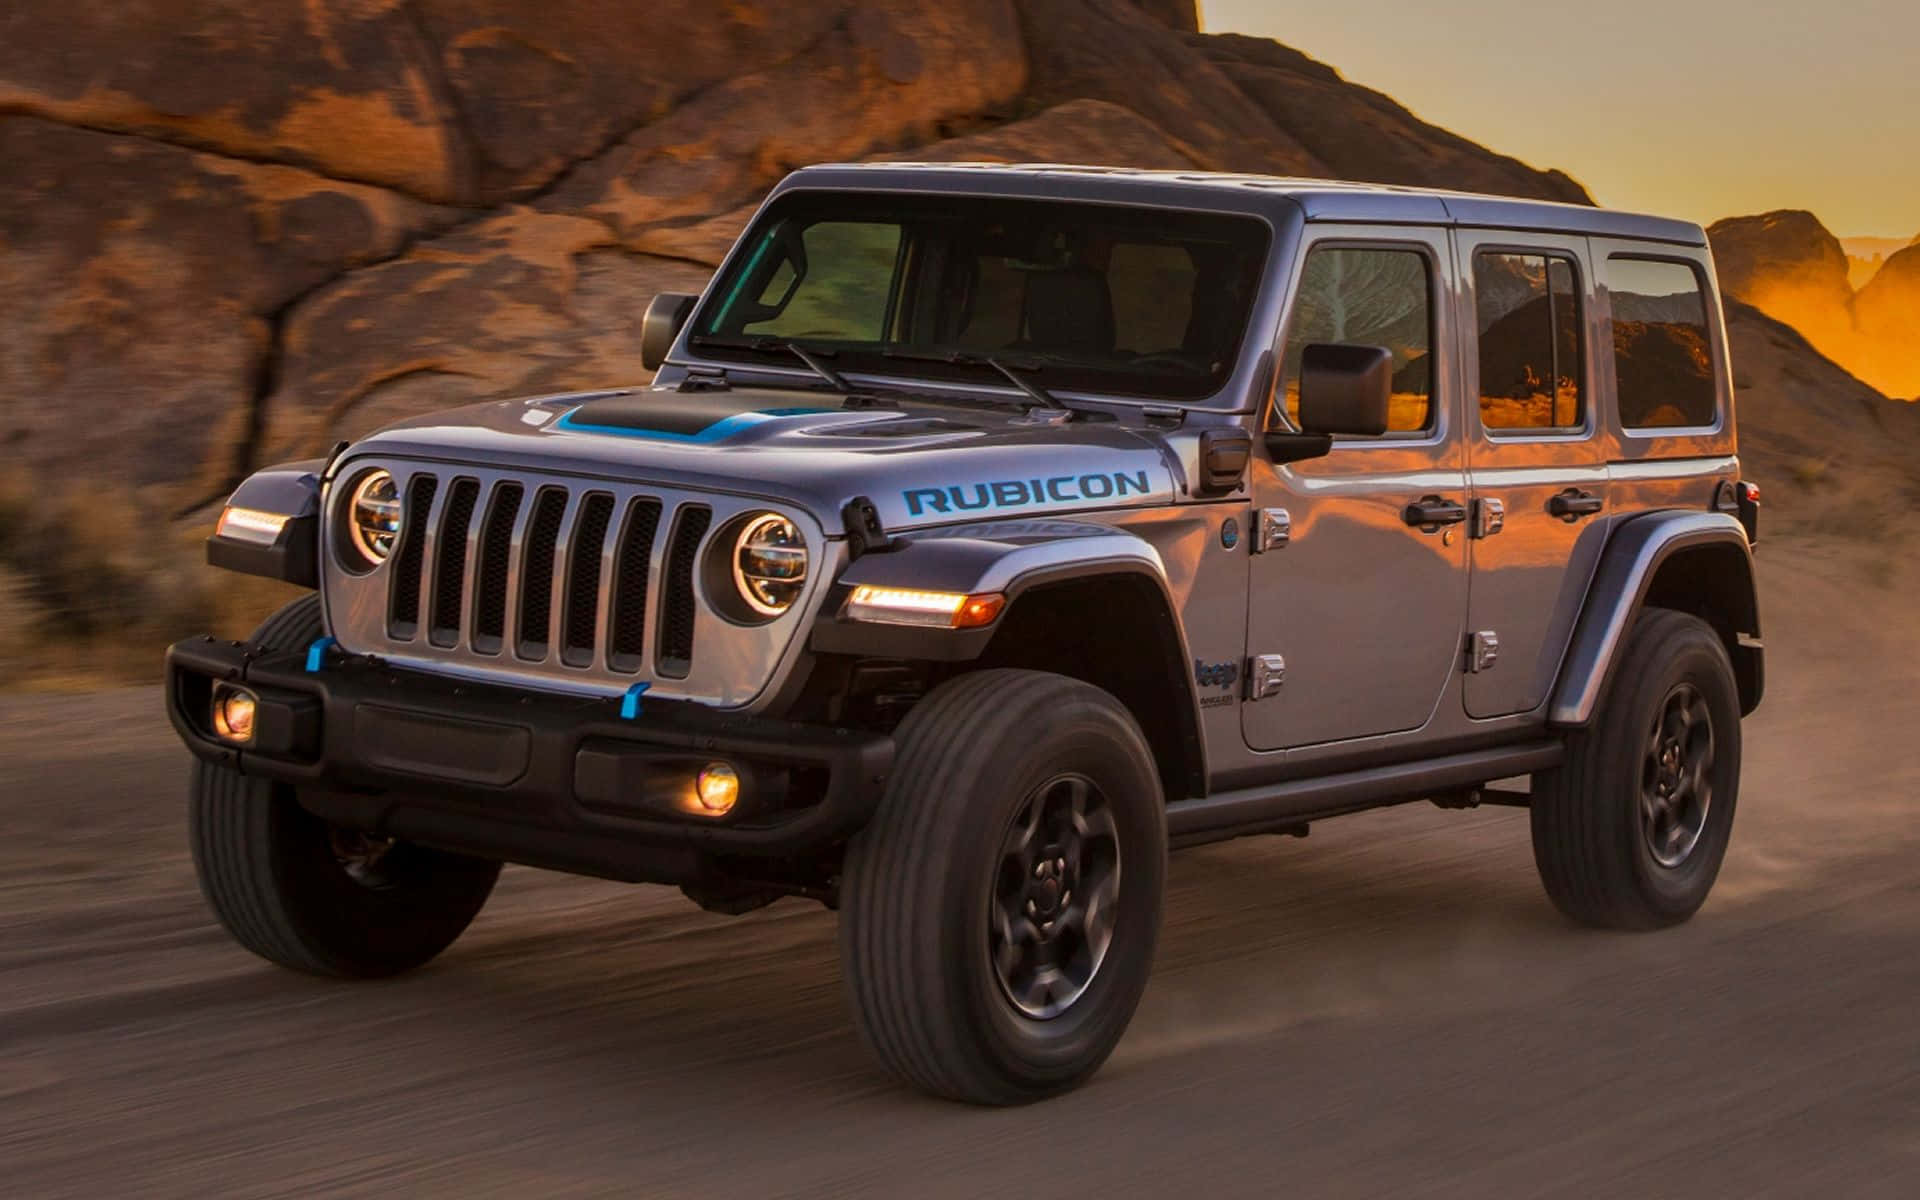 Get Ready! Take your Adventure to the Next Level in a Jeep